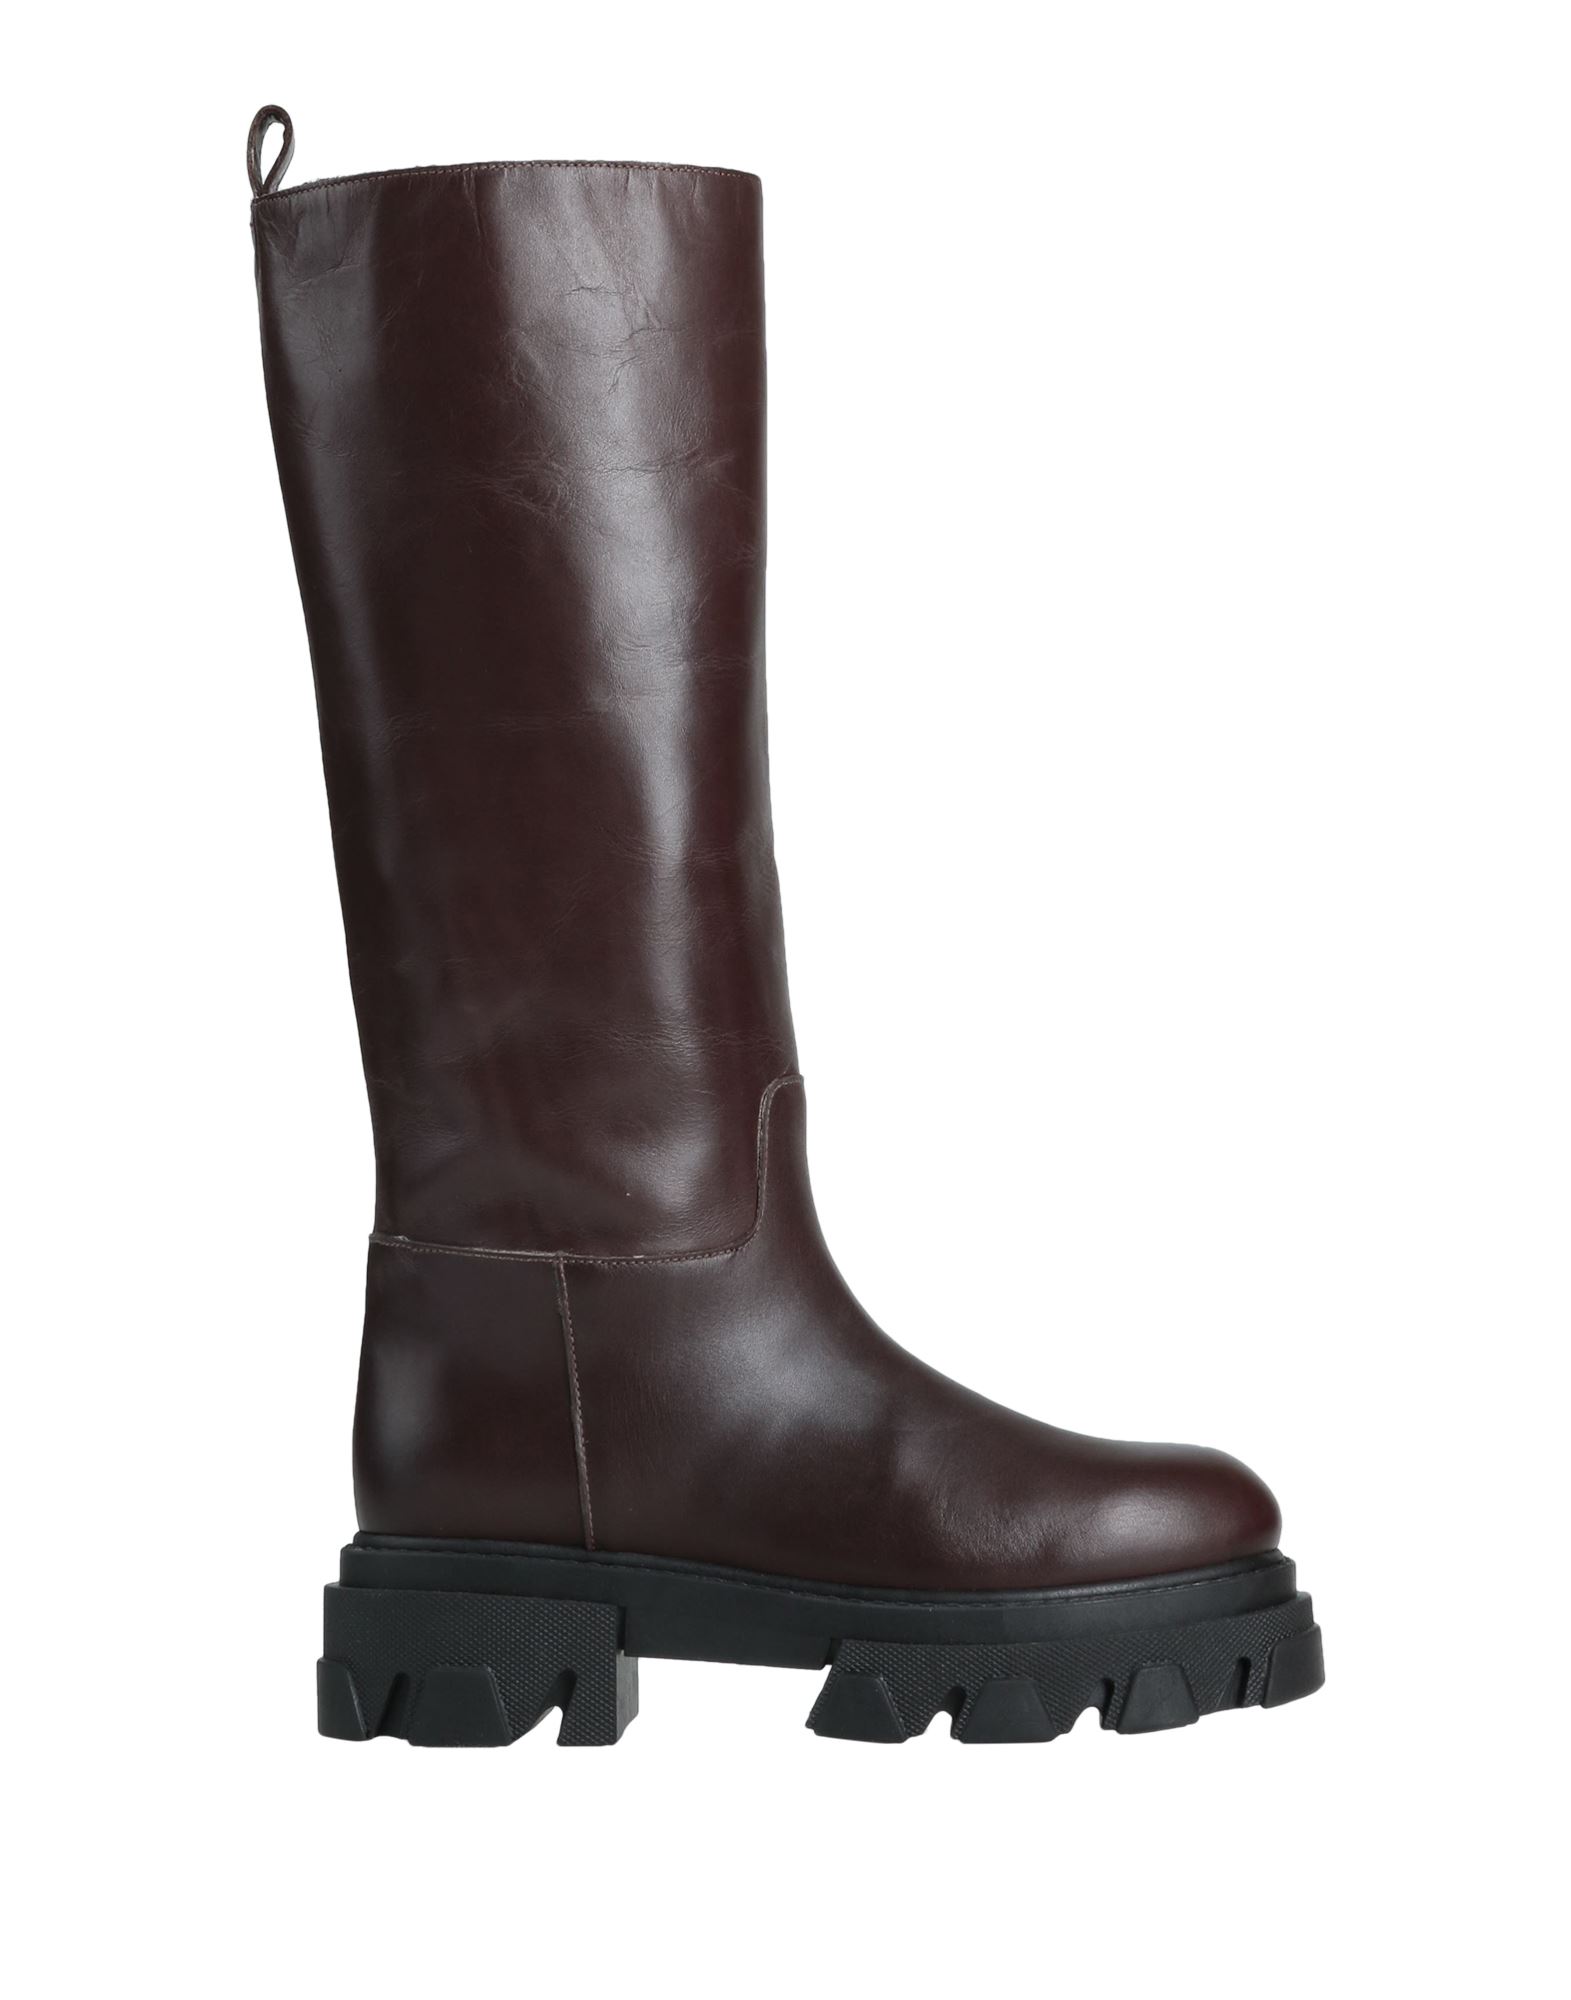 P.A.R.O.S.H. leather knee boots - Brown